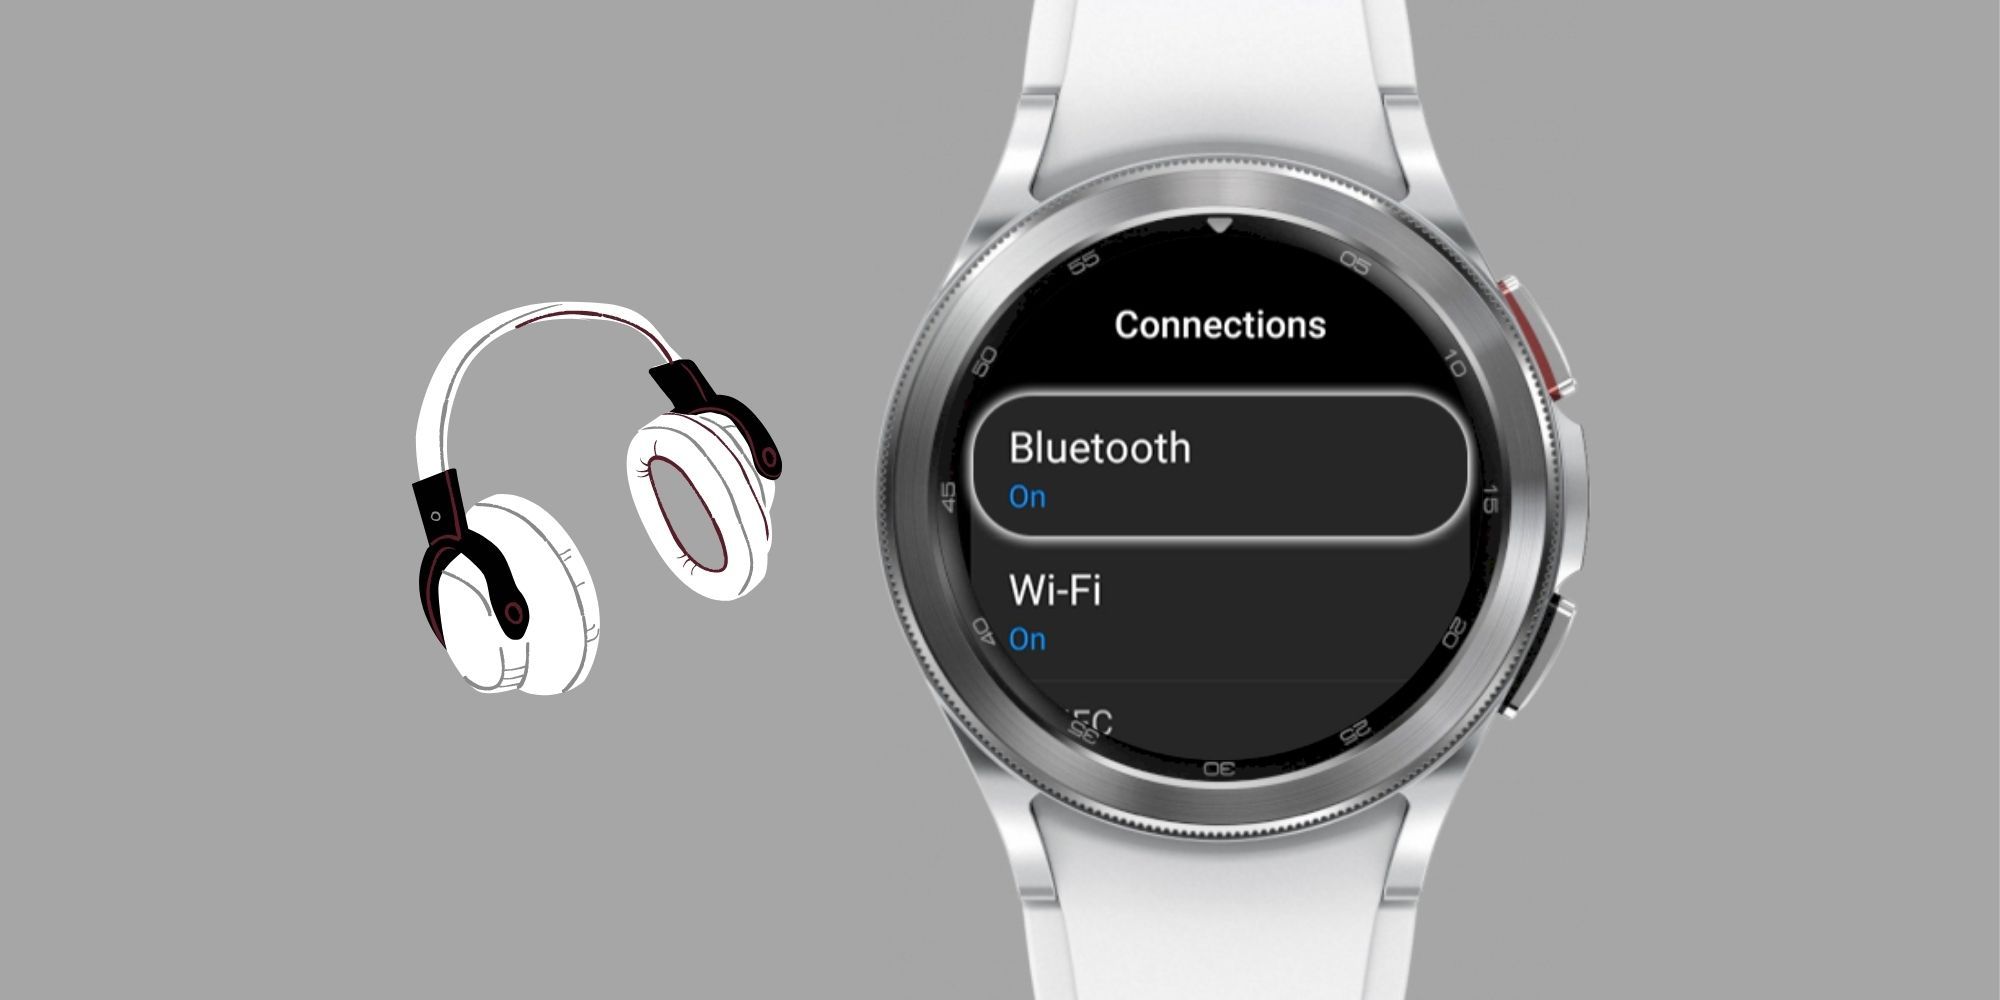 How to pair Bluetooth headphones on Apple Watch - 9to5Mac